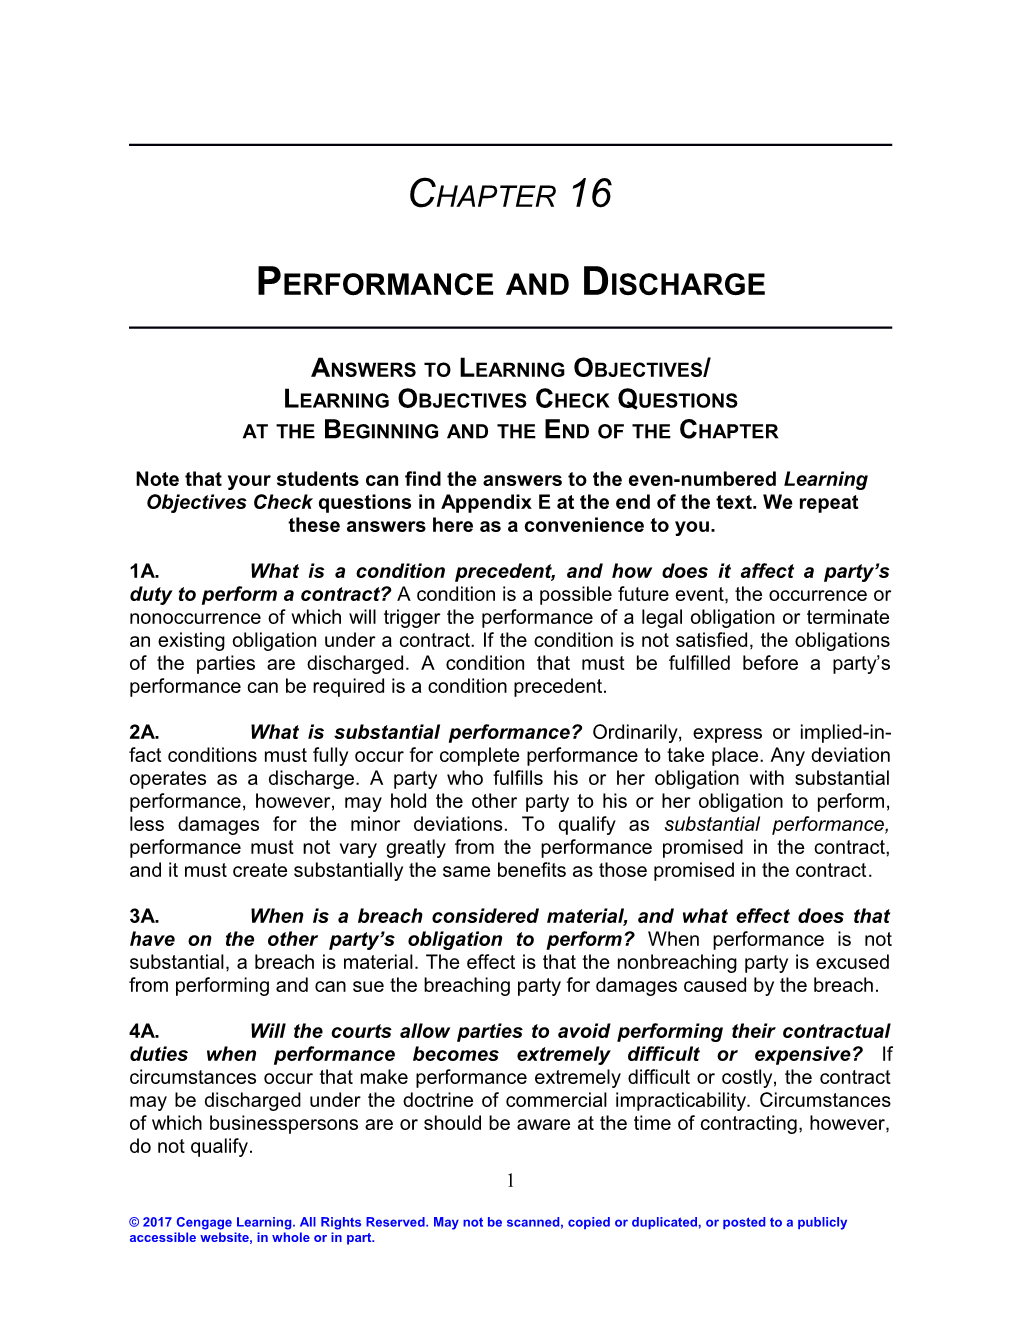 Chapter 16: Performance and Discharge 1